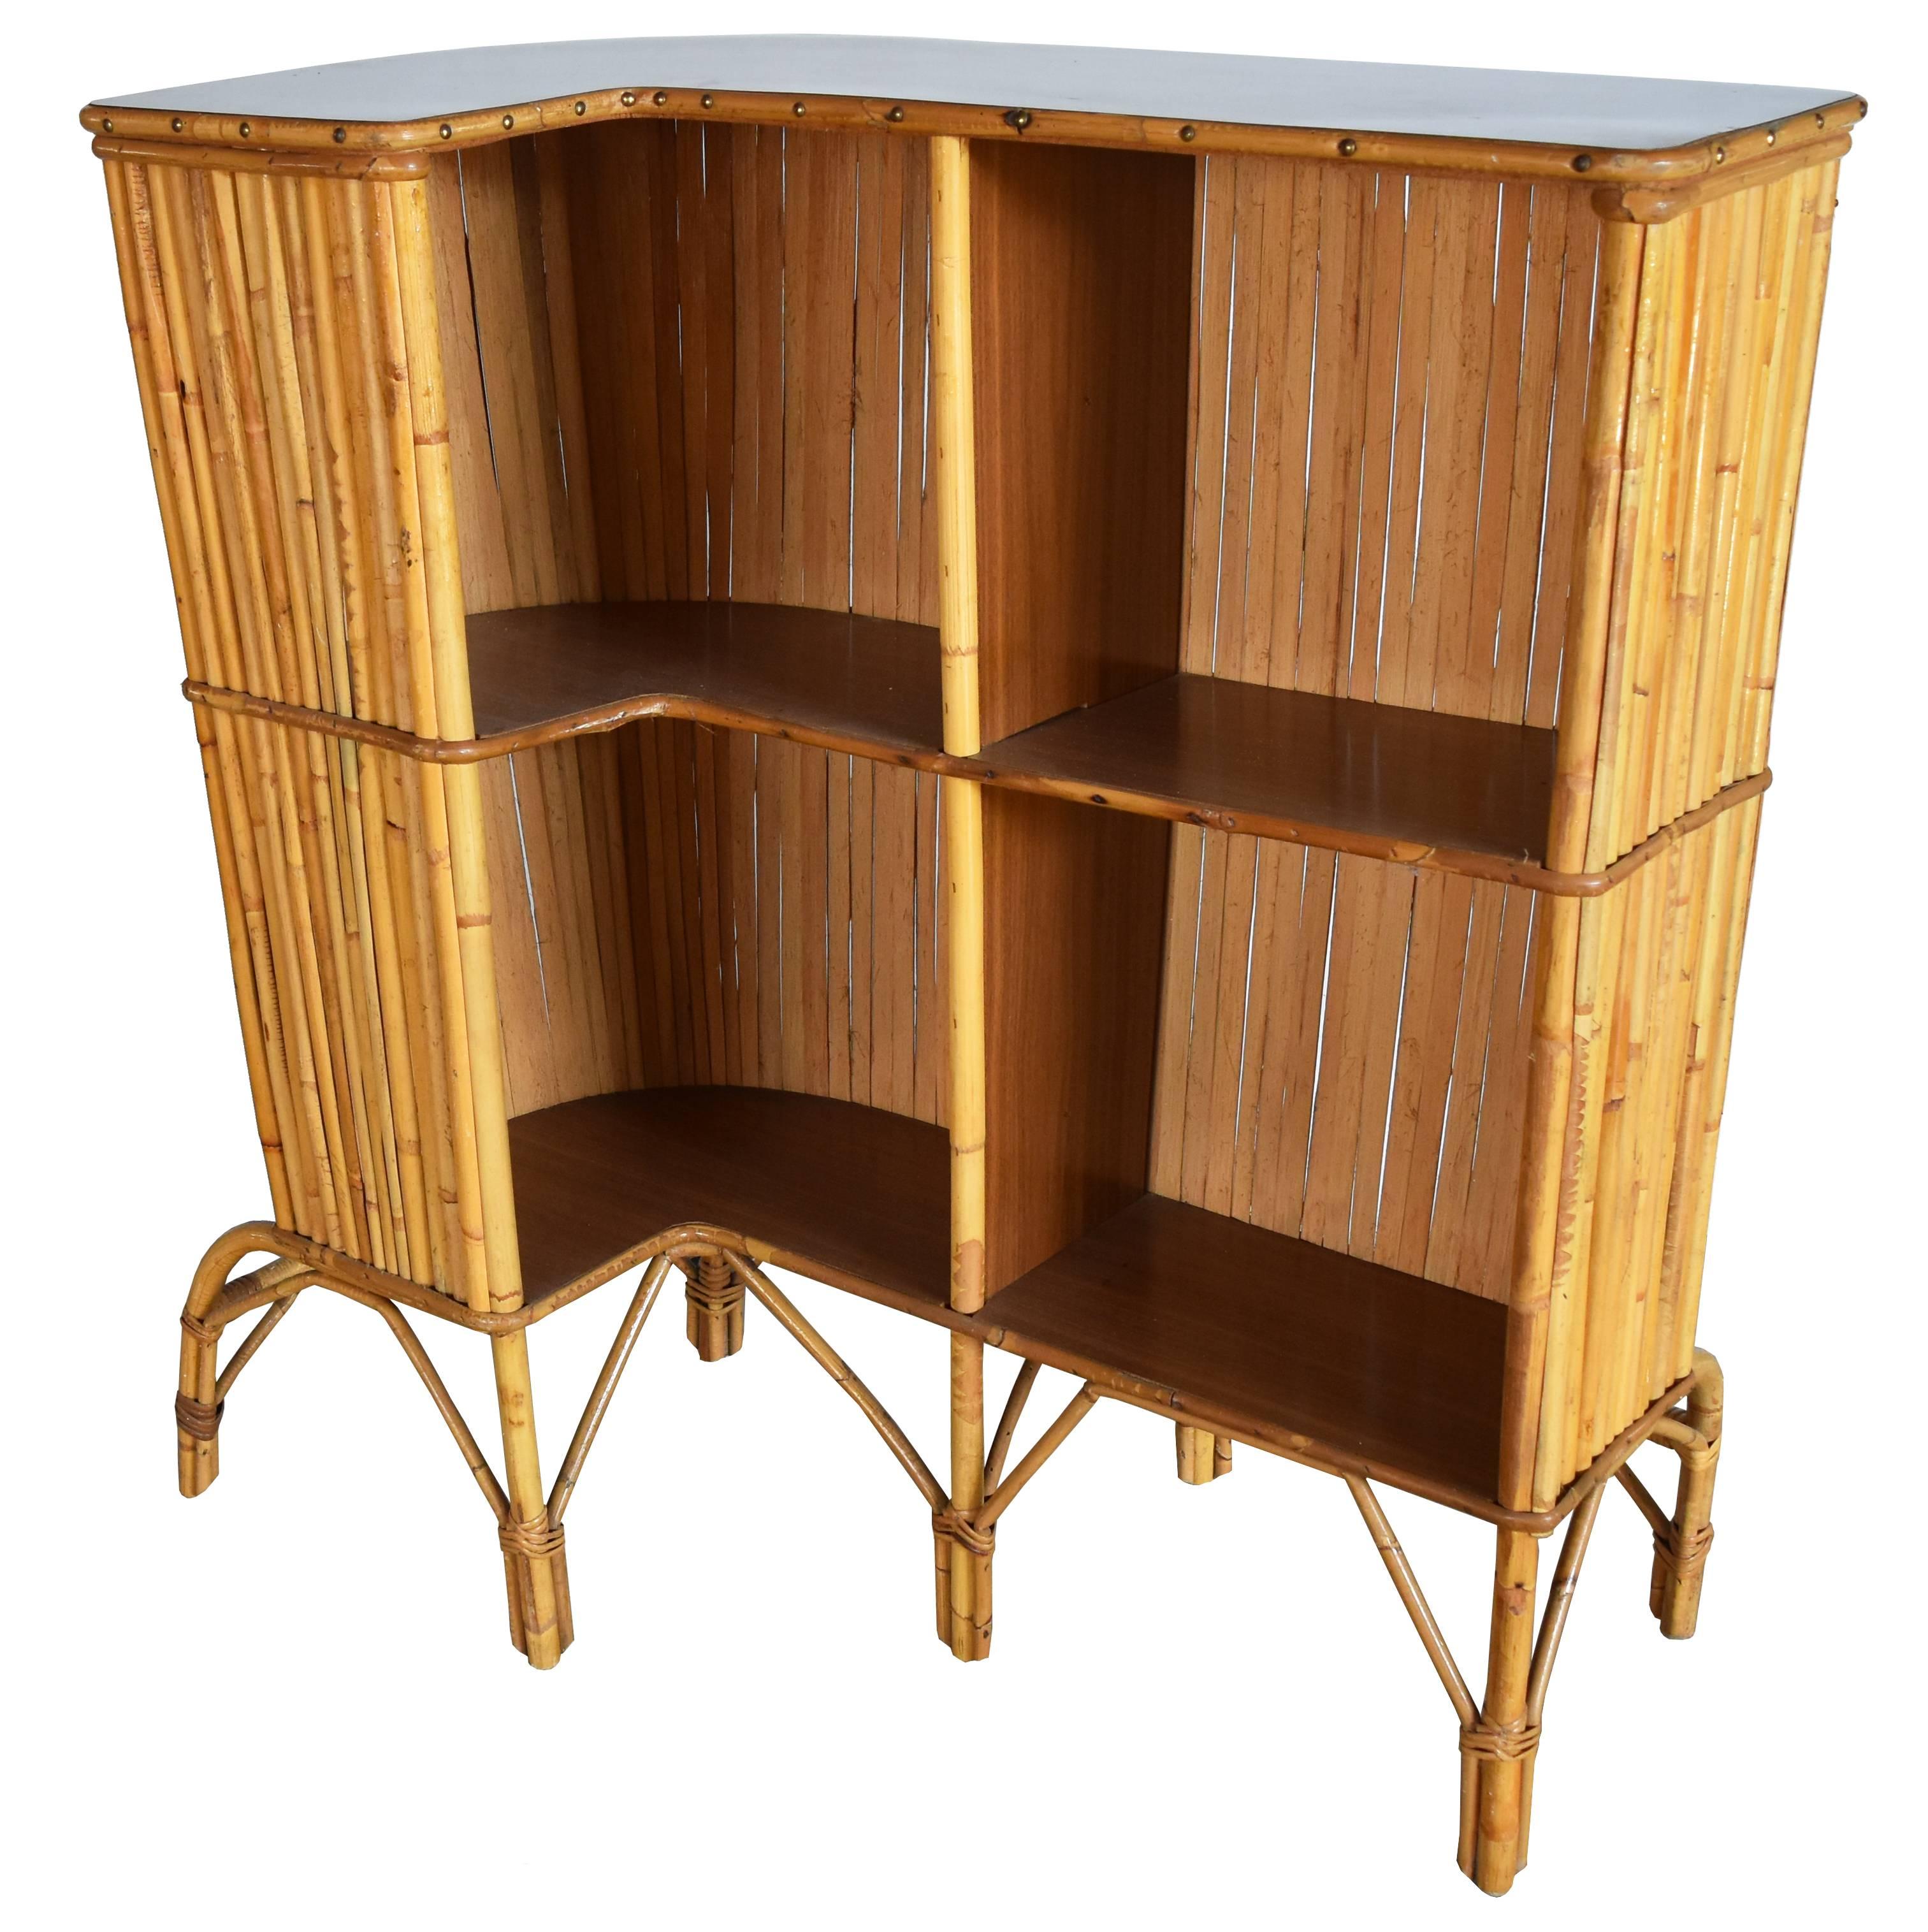 L-shaped mini bar finished with a wooden black lacquered top. Bamboo arched legs and front vertical decorations. In pristine condition.

